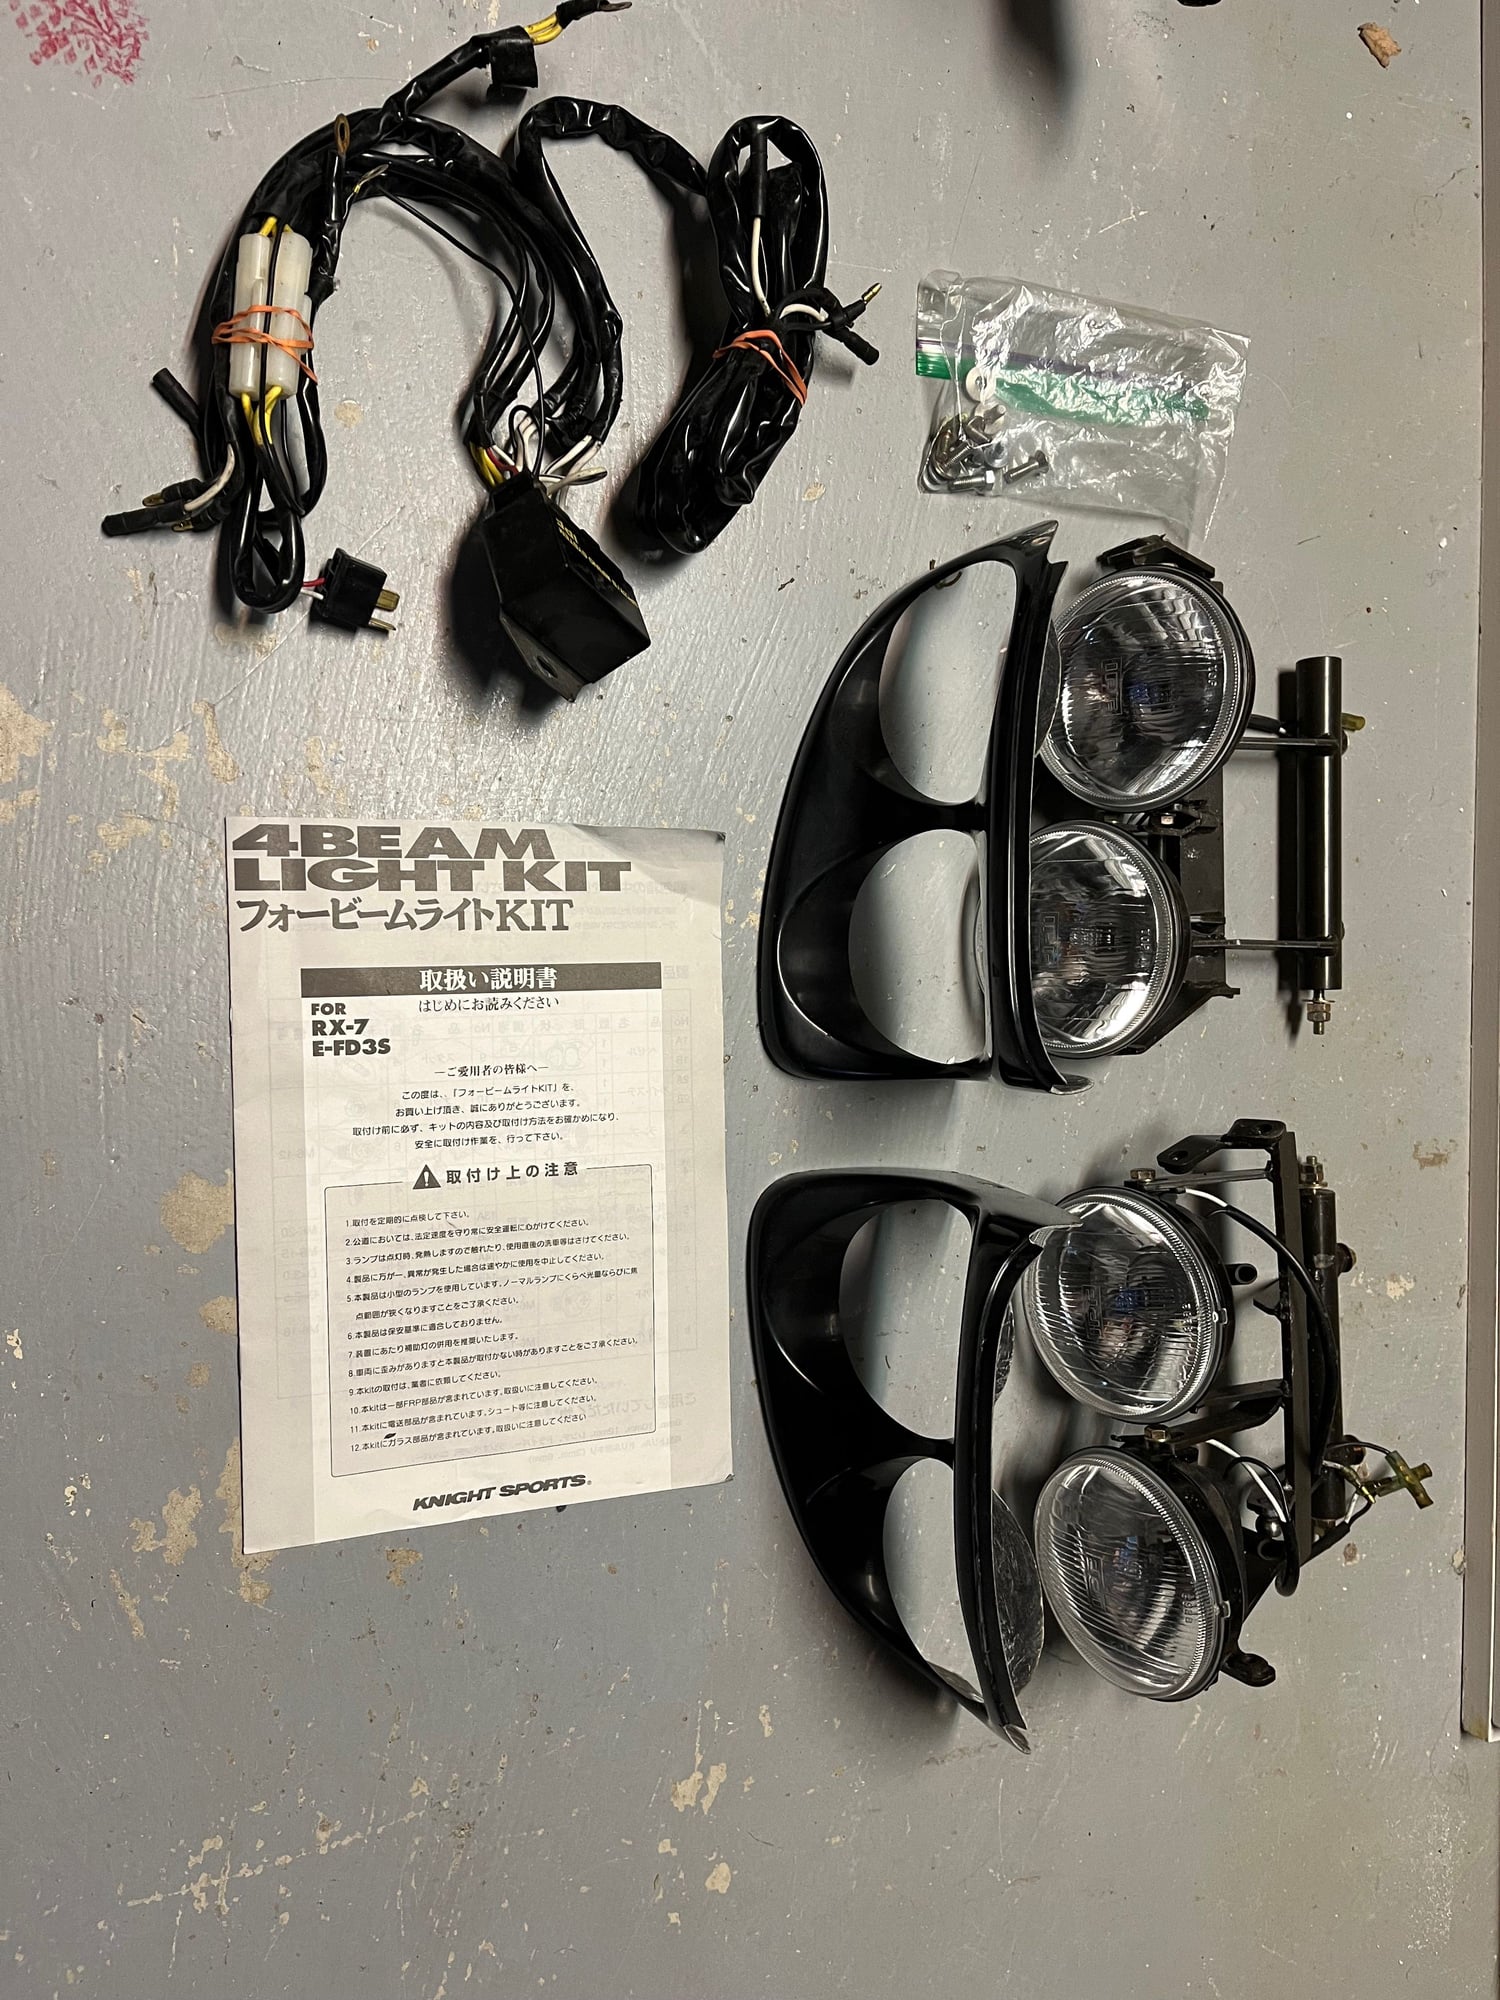 Lights - Knightsport Headlight Kit and M2 CF Intake - Used - 1993 to 2002 Mazda RX-7 - Oakville, ON L6J 5Y, Canada